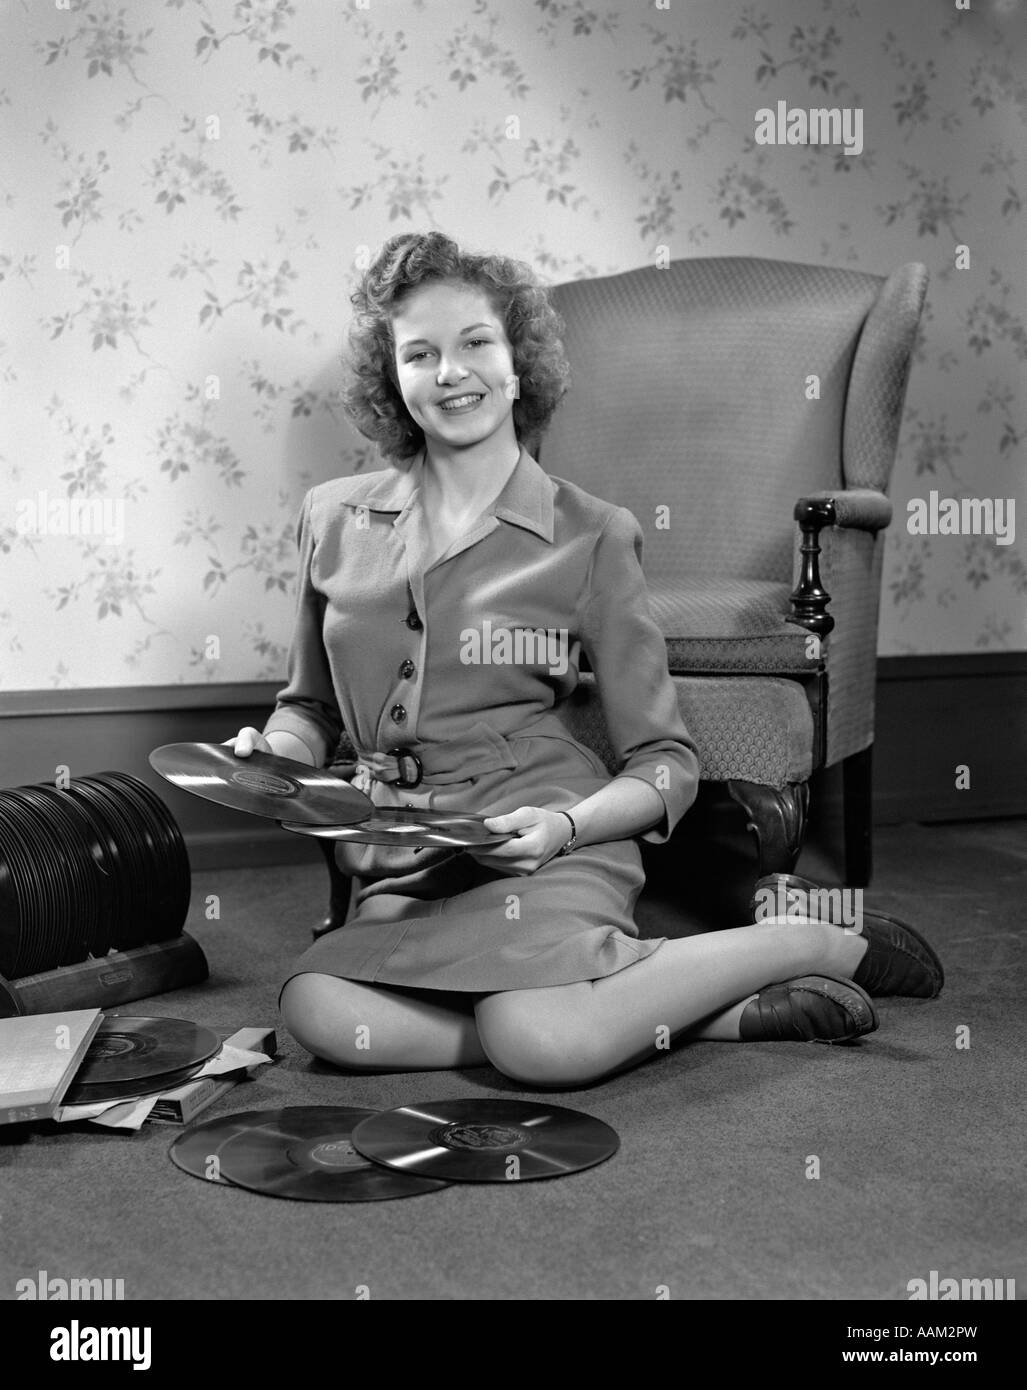 1940s YOUNG WOMAN TEEN SITTING ON FLOOR BY CHAIR HOLDING SORTING 78 RPM PHONOGRAPH RECORDS Stock Photo